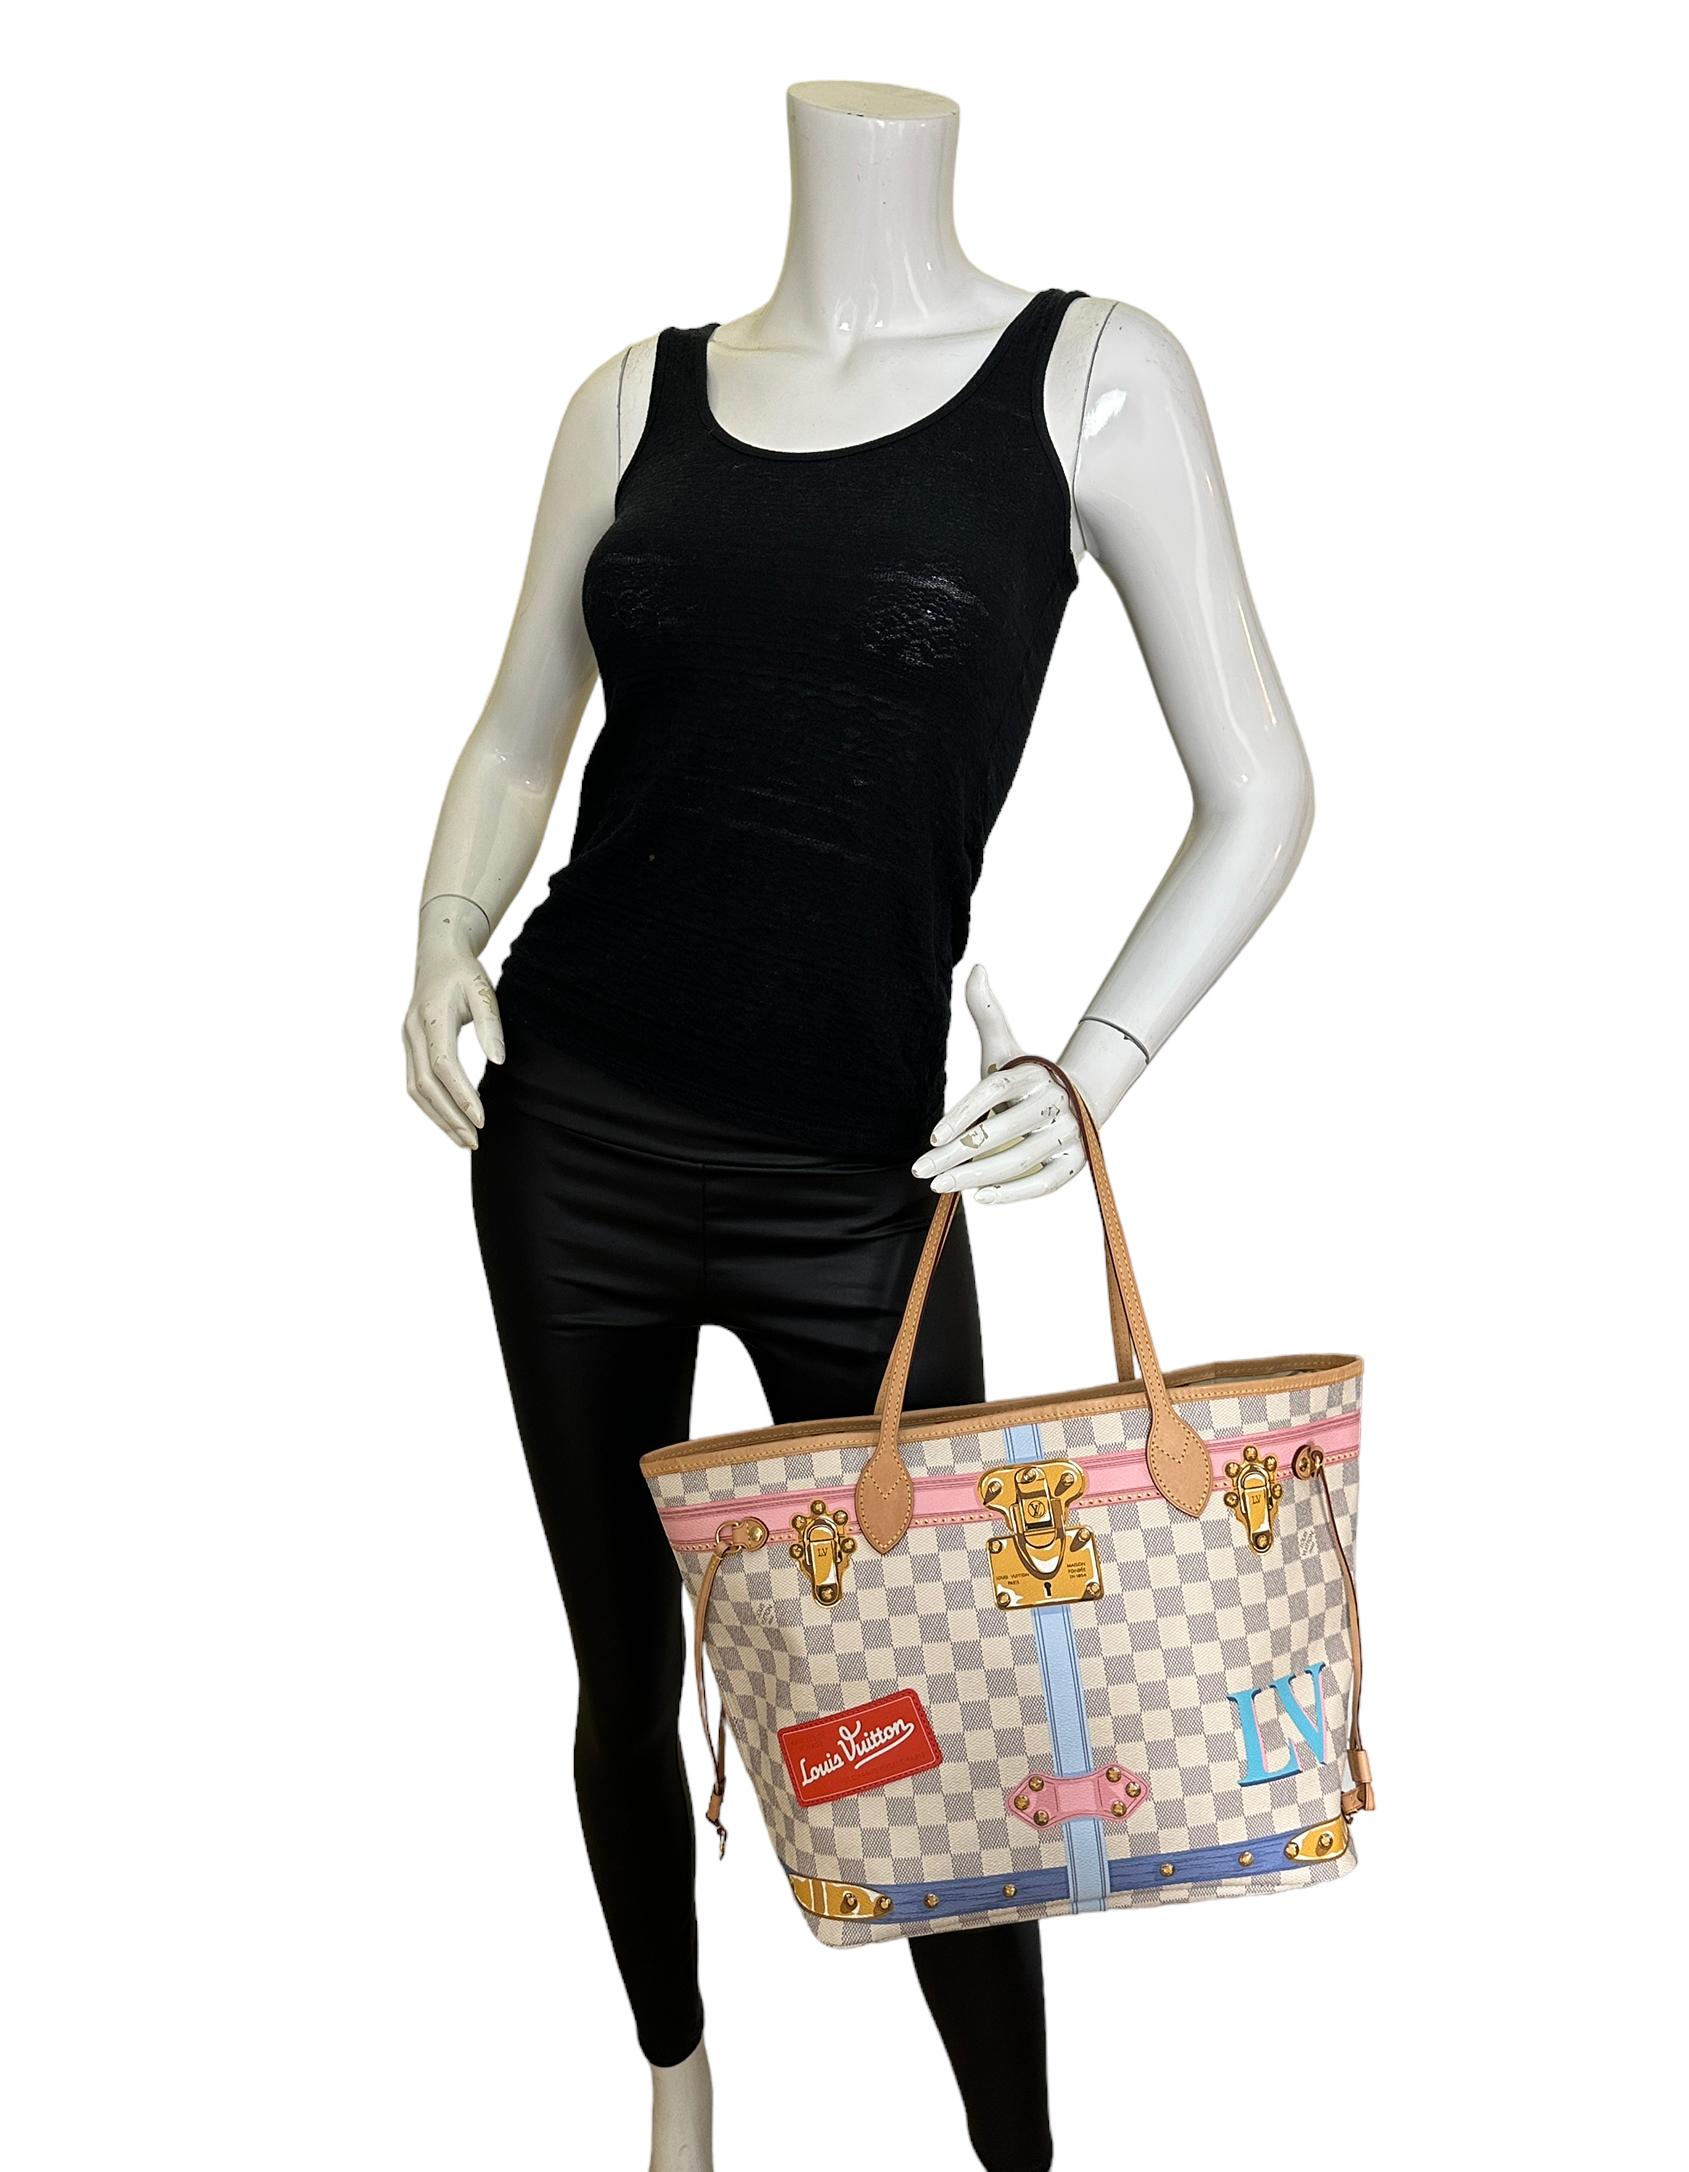 Louis Vuitton Damier Azur Summer Trunks Neverfull MM Tote Bag

Made In: USA
Year of Production: 2018
Color: White, grey, blue, pink, gold
Hardware: Goldtone
Materials: Coated canvas, vachetta leather trim
Lining: Printed canvas
Closure/Opening: Open